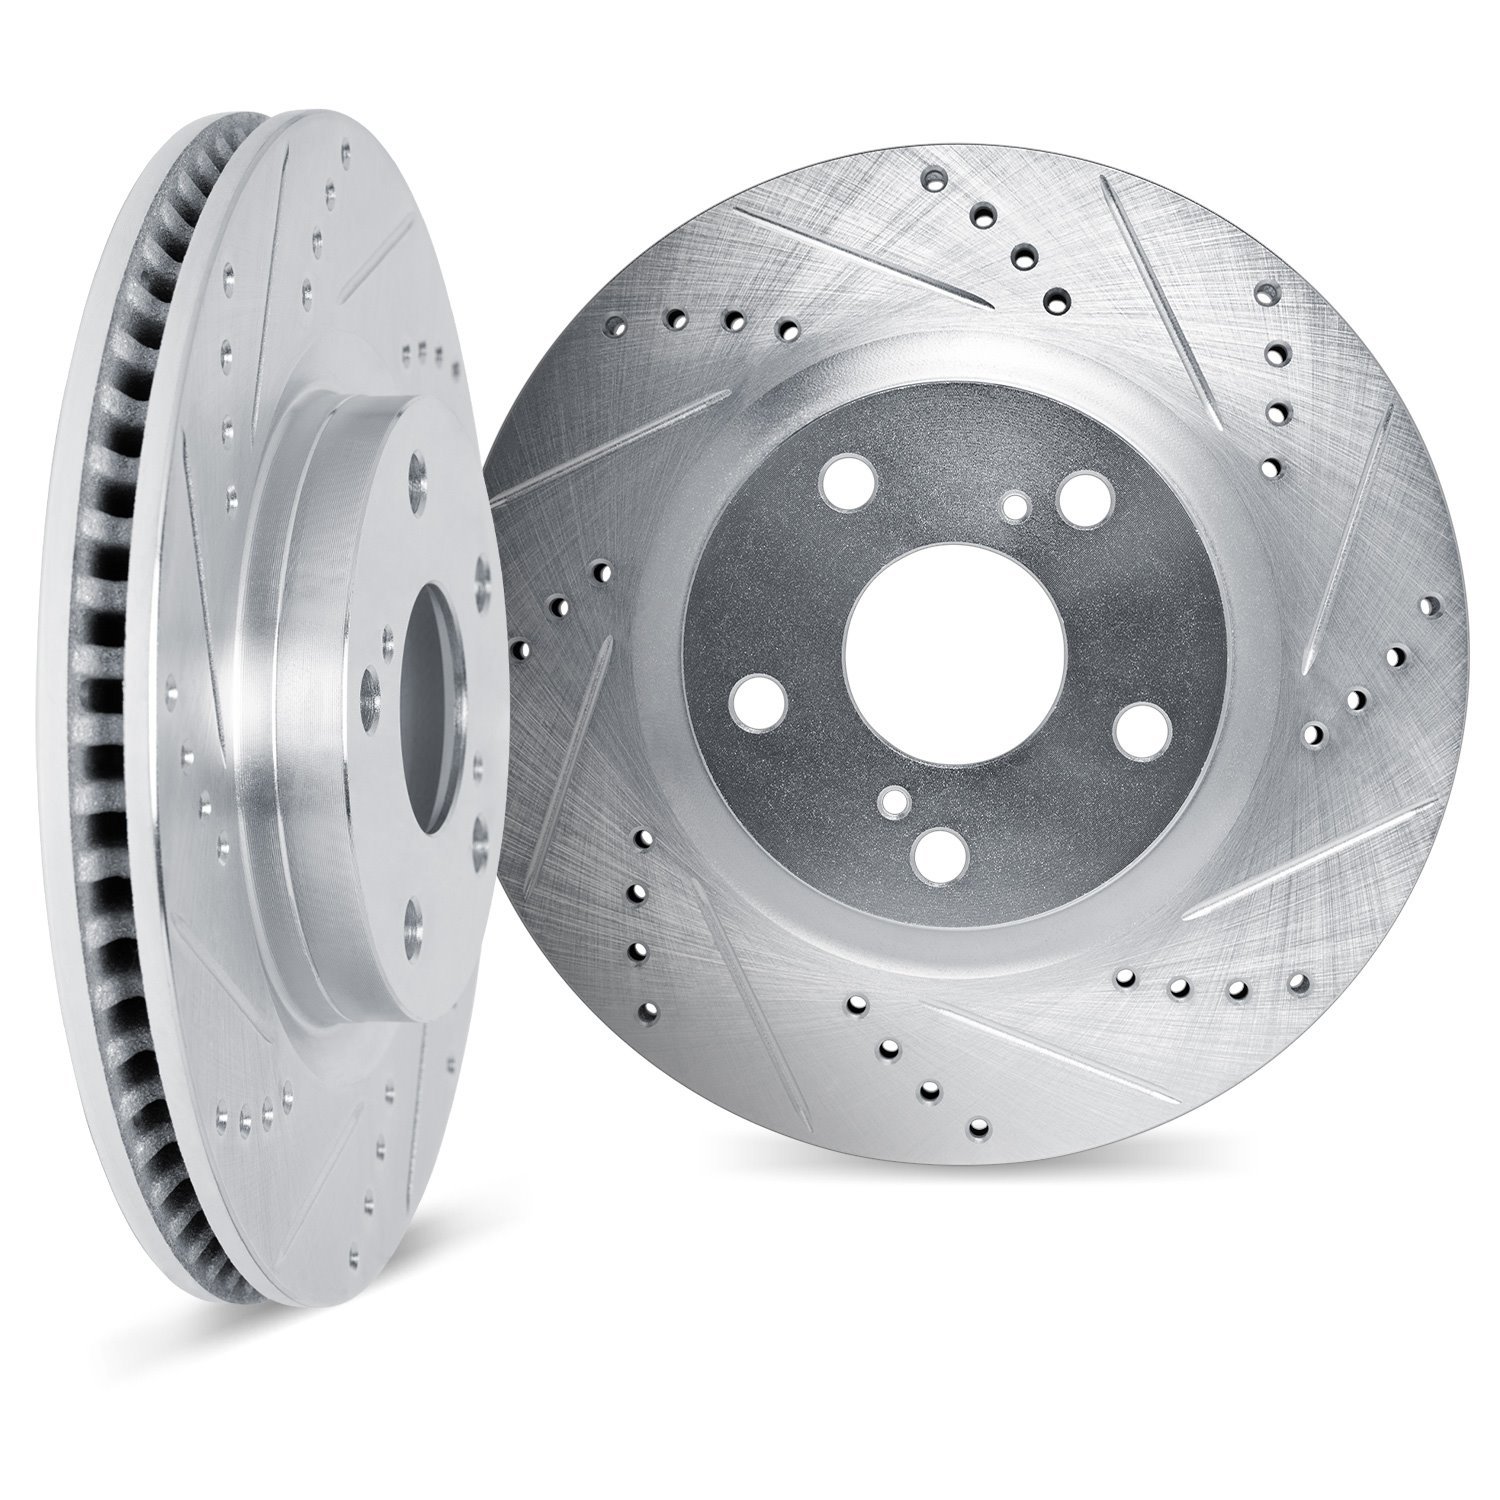 7002-76143 Drilled/Slotted Brake Rotors [Silver], 1991-1995 Lexus/Toyota/Scion, Position: Rear